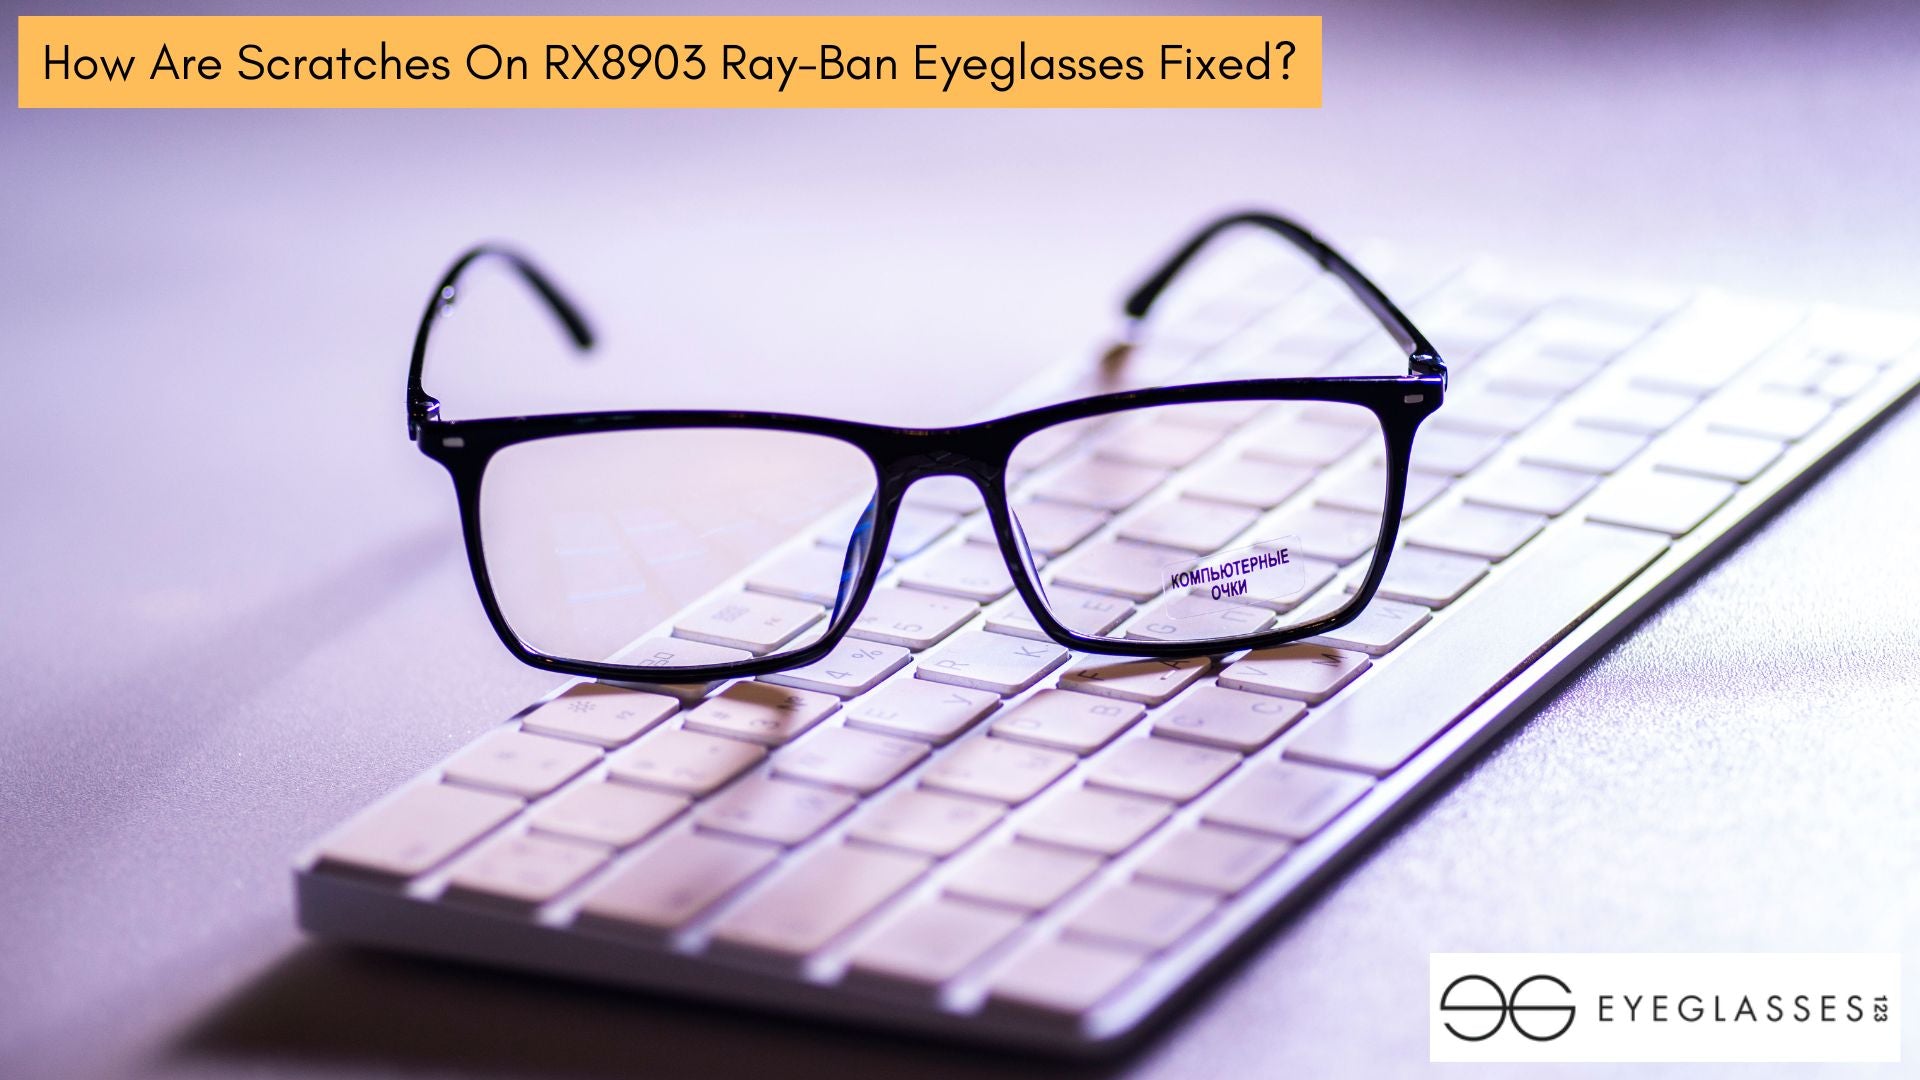 How Are Scratches On RX8903 Ray-Ban Eyeglasses Fixed?